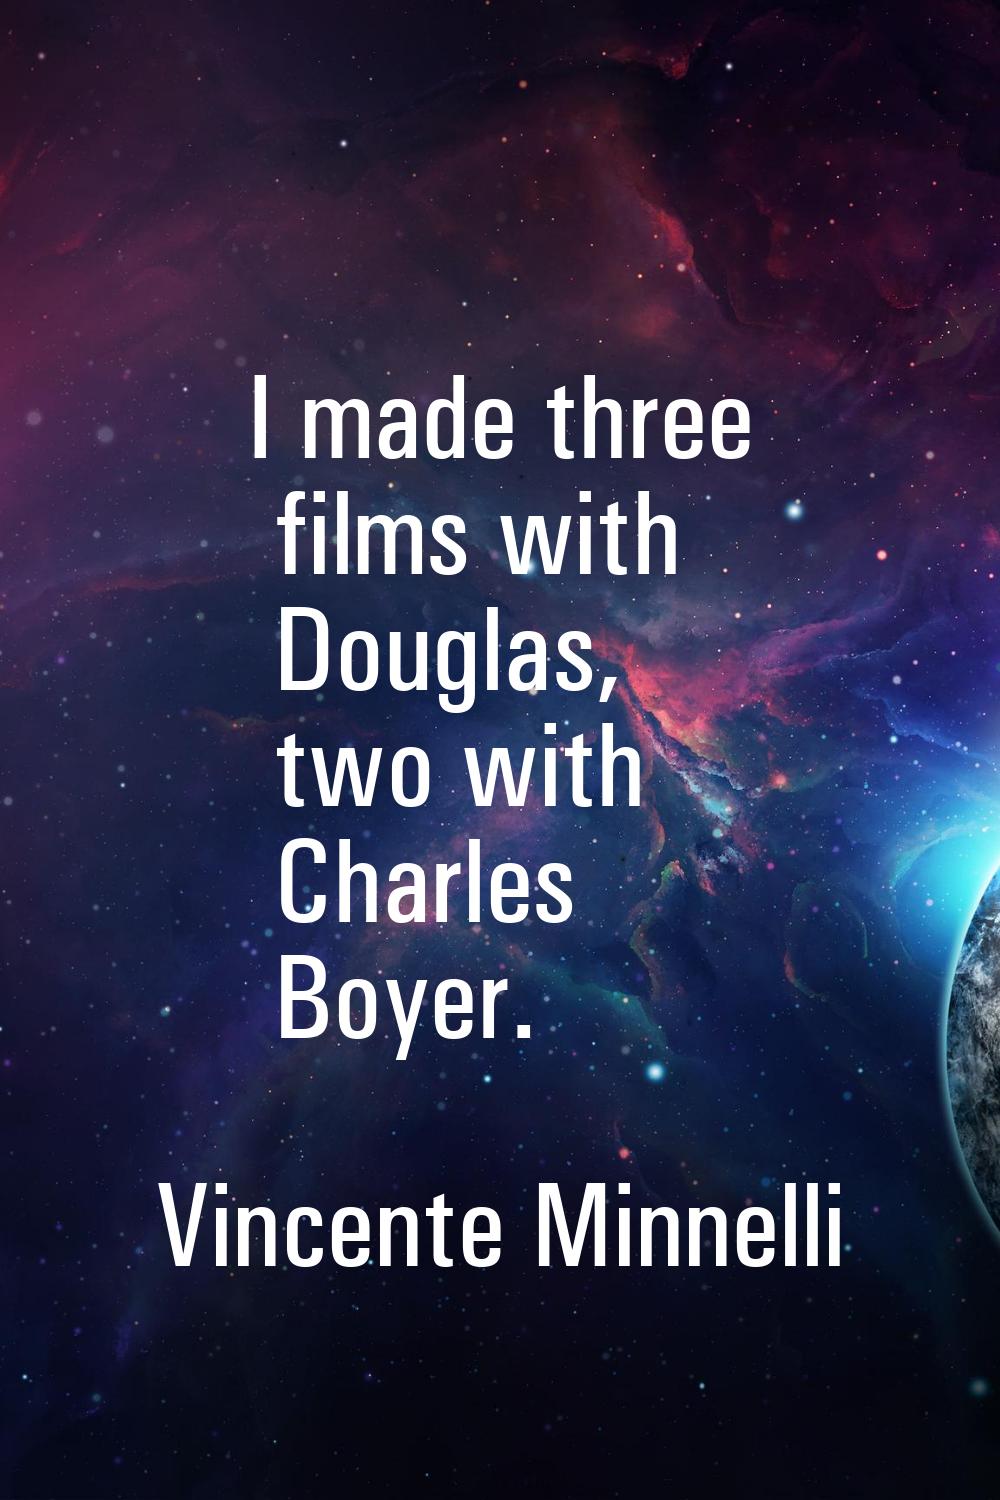 I made three films with Douglas, two with Charles Boyer.